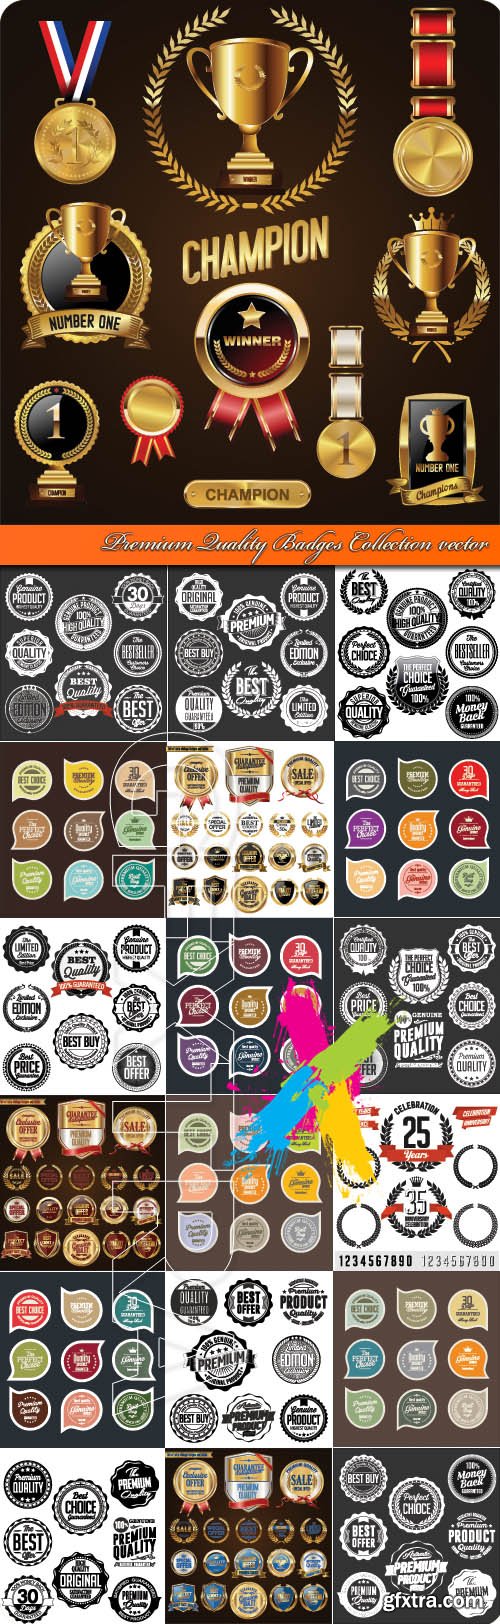 Premium Quality Badges Collection vector